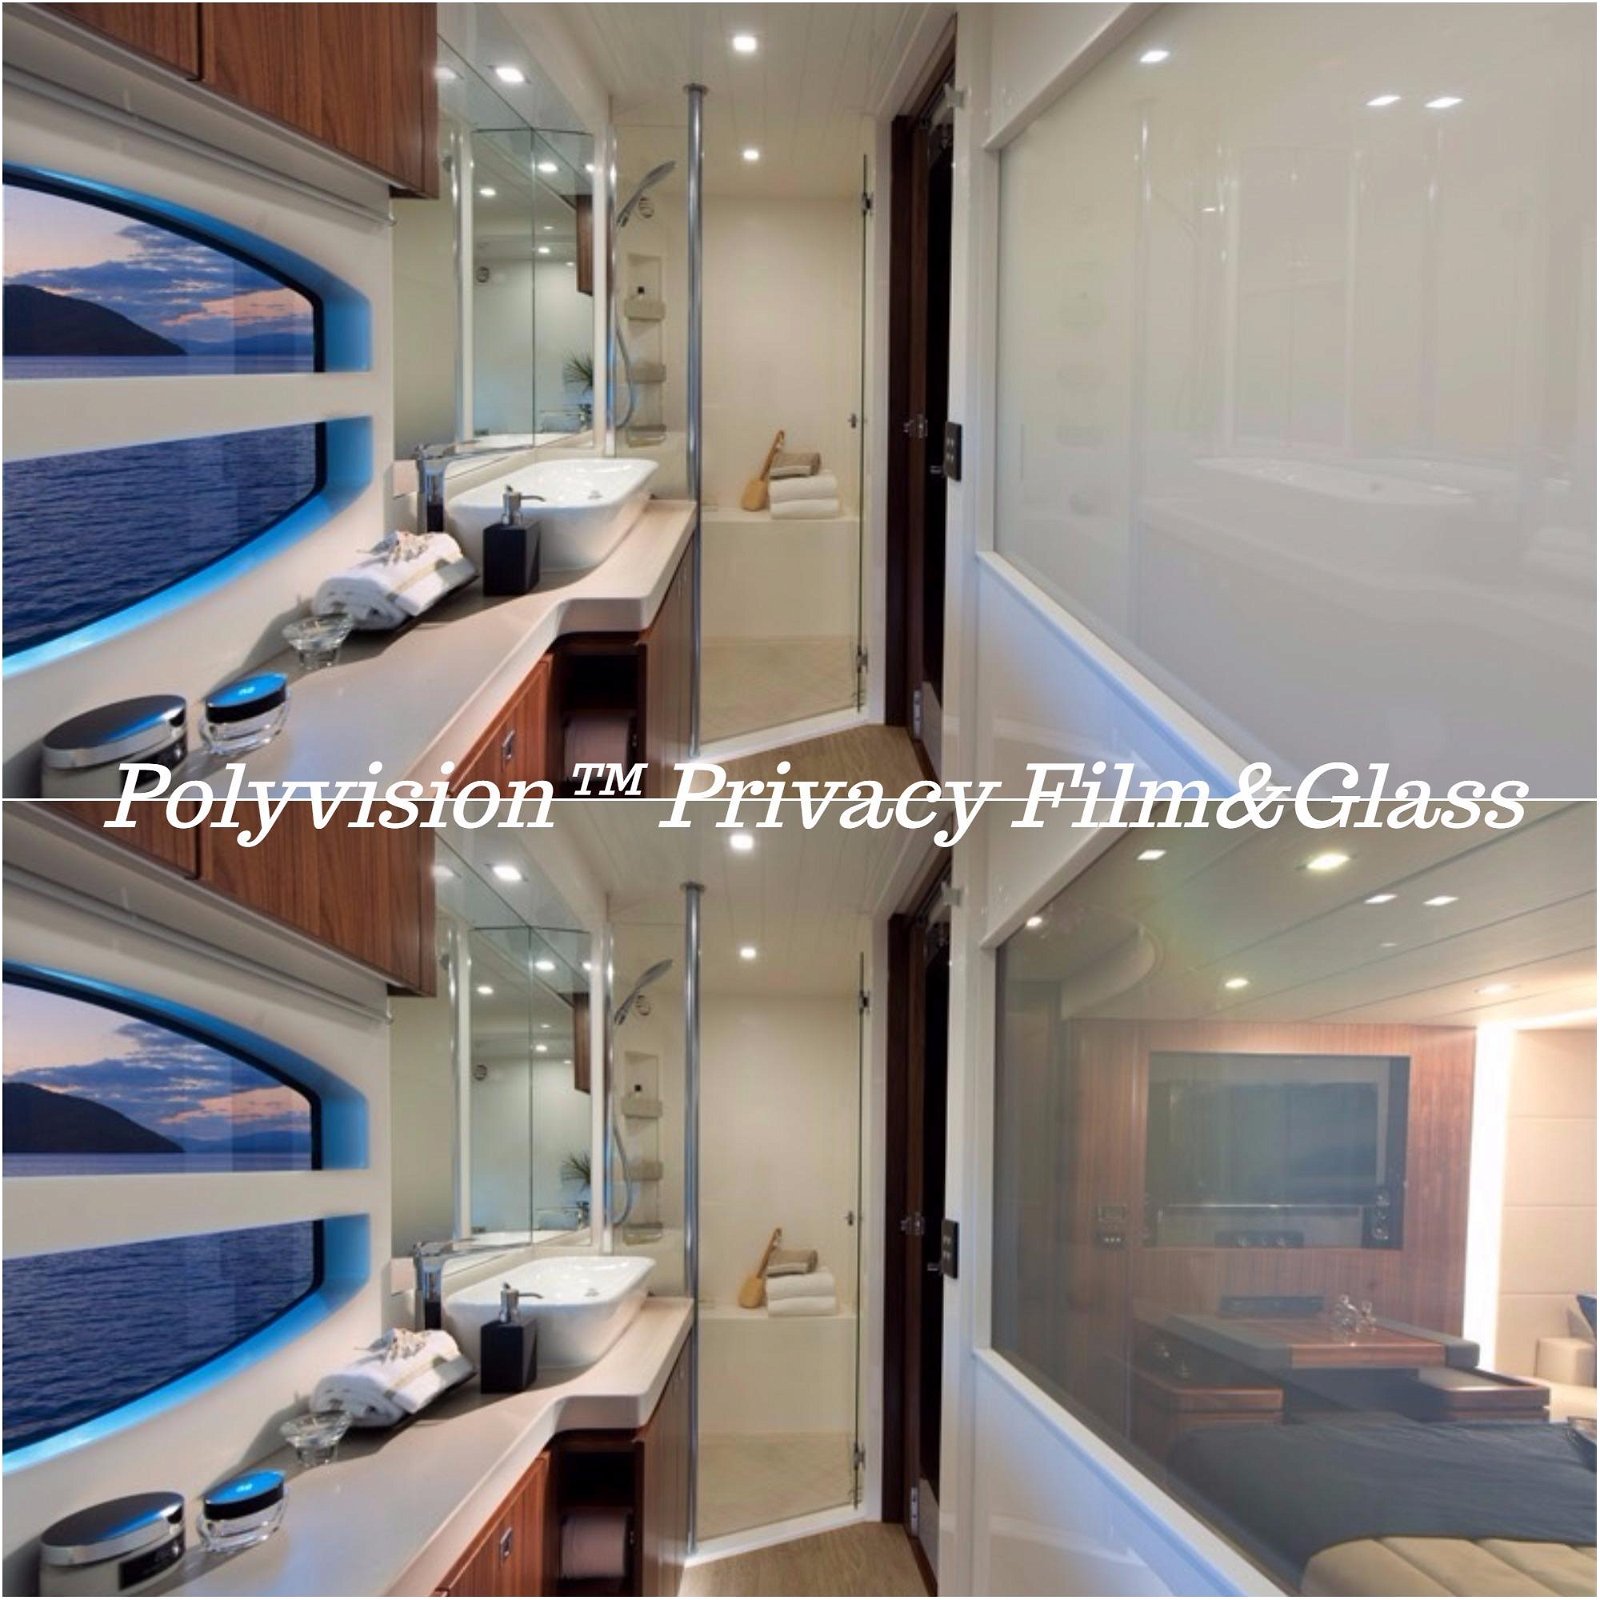 Polyvision Privacy Glass 2